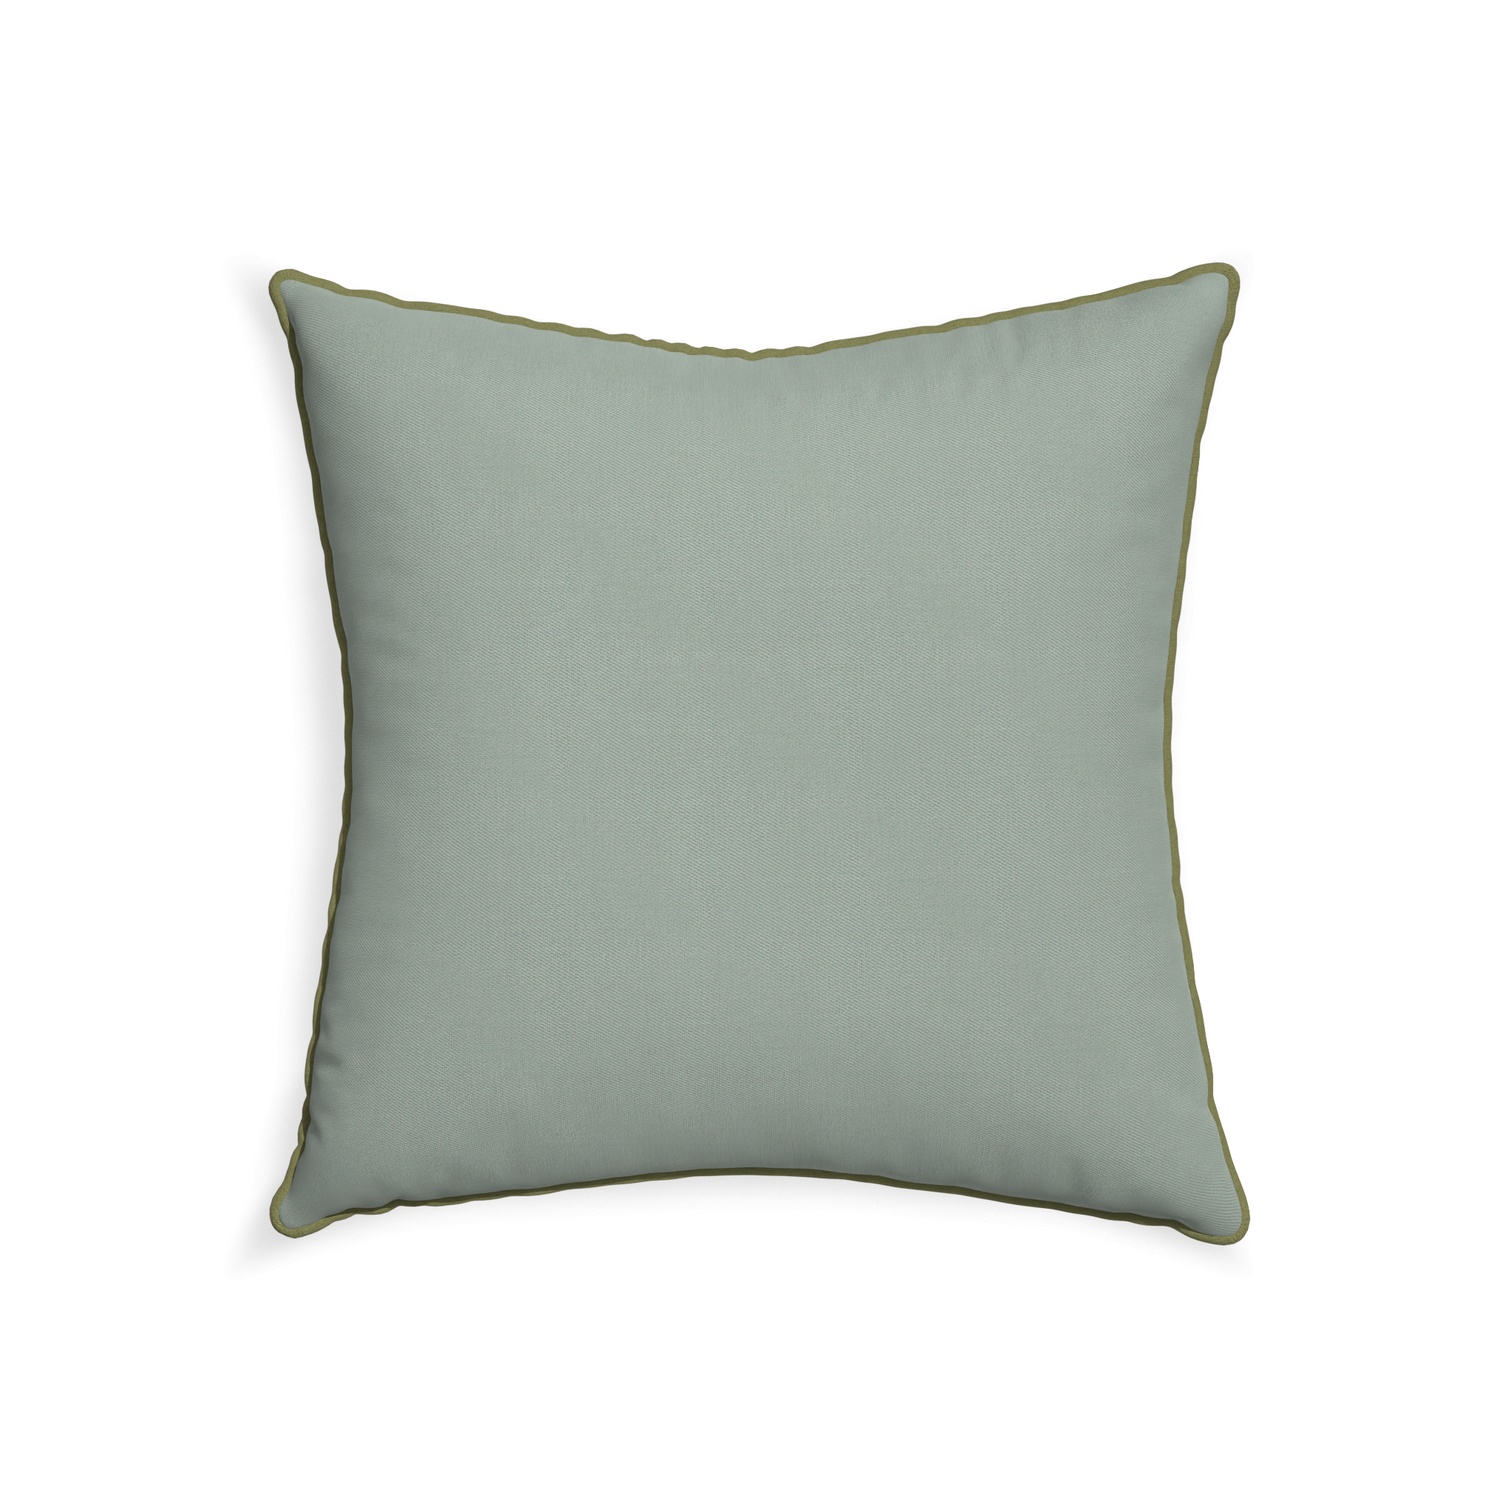 square sage green pillow with sage green piping